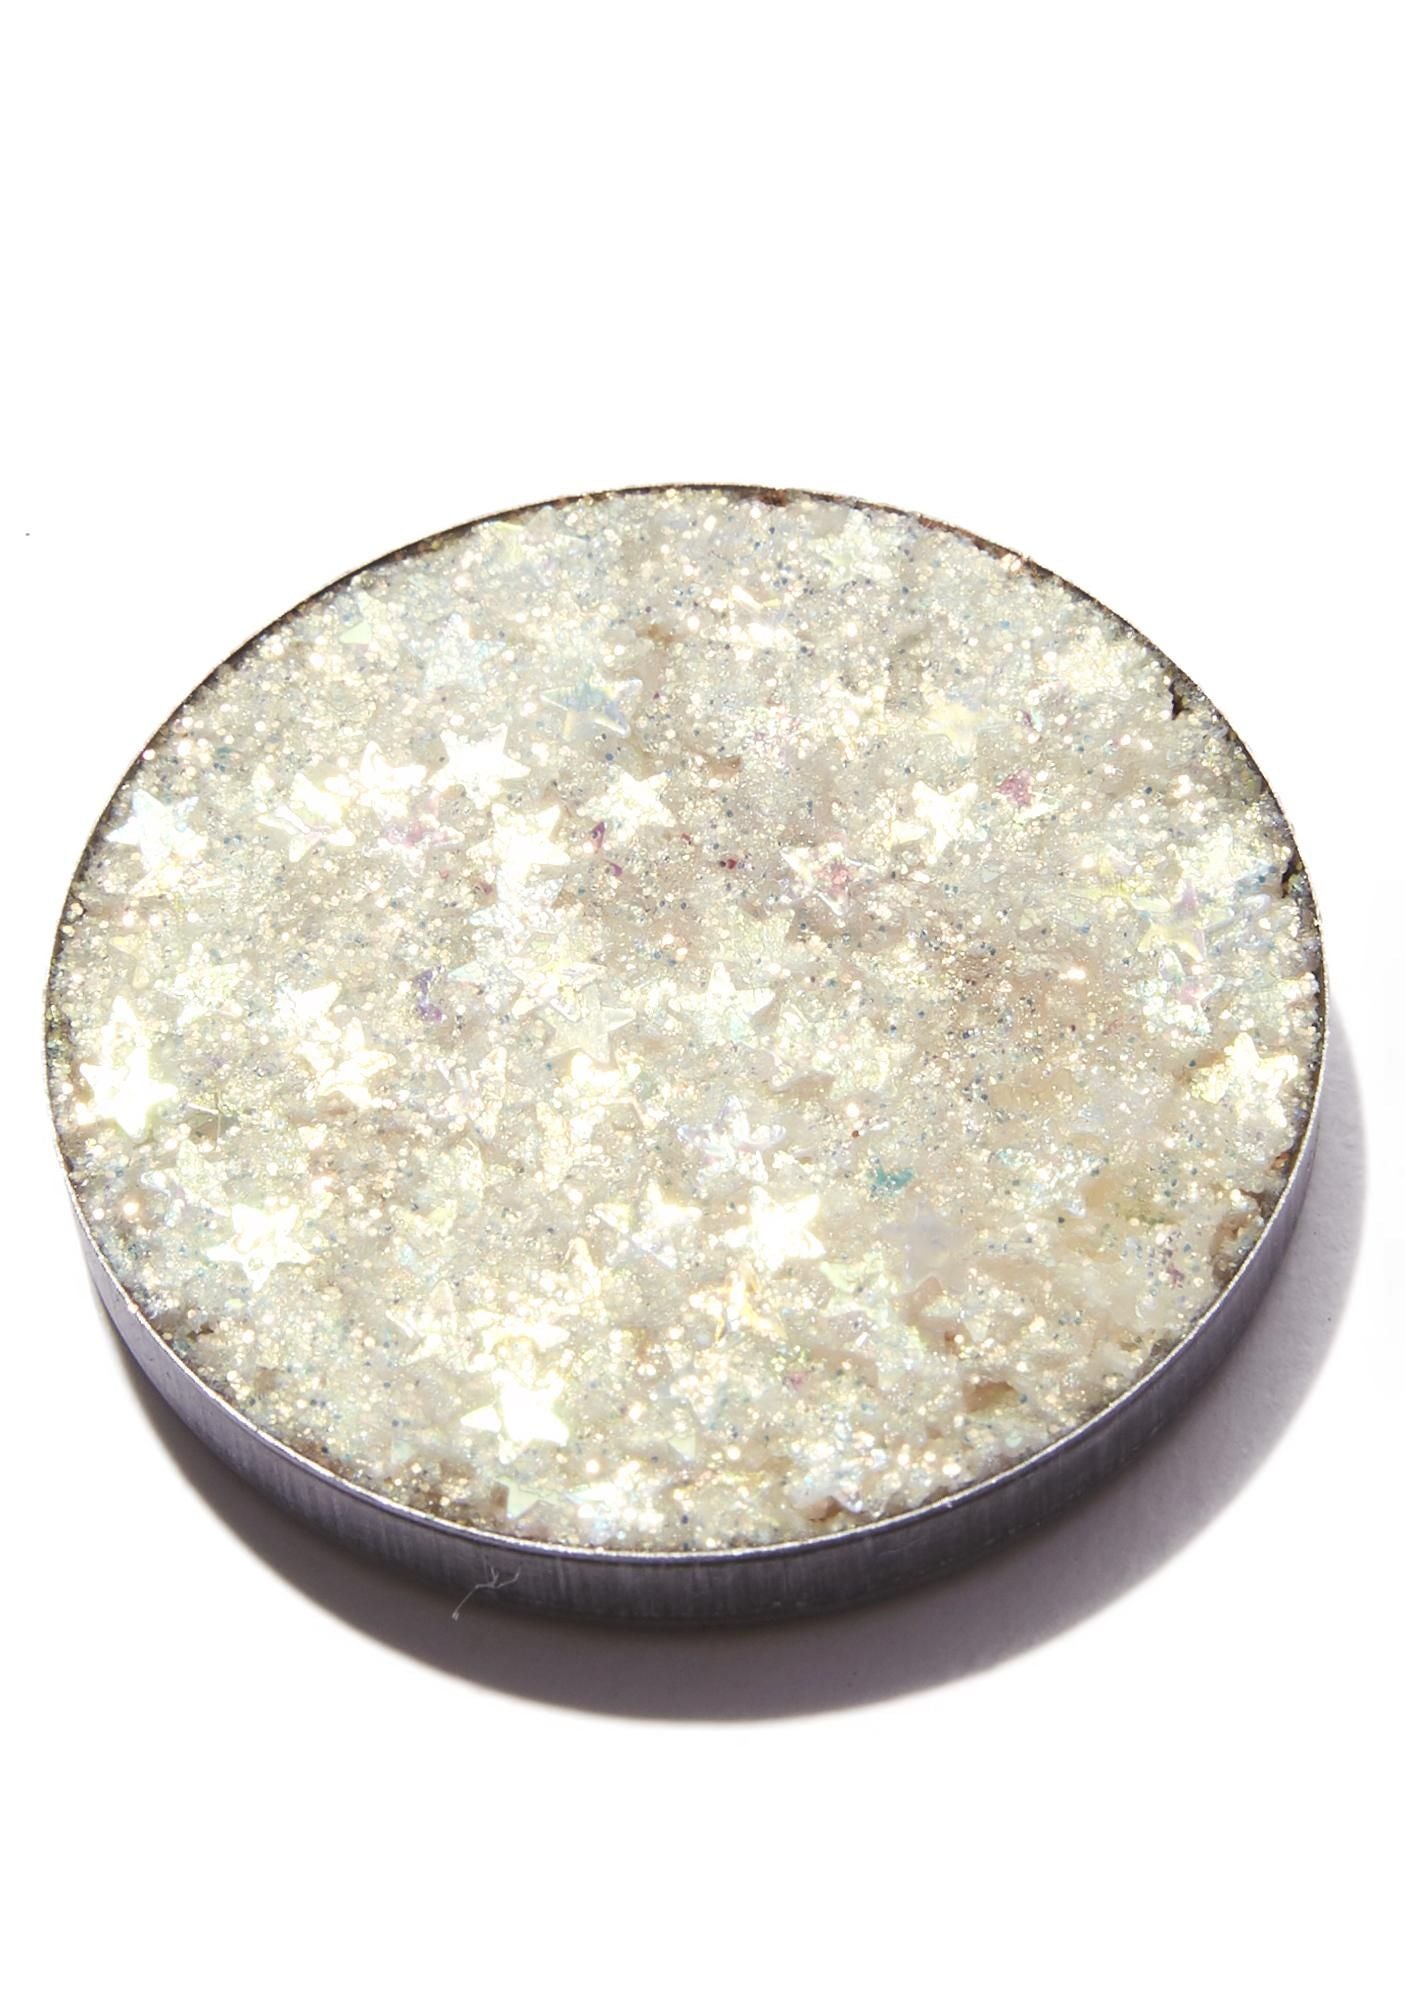 GLITTER HIGHLIGHTER IN STAR OF THE SEA